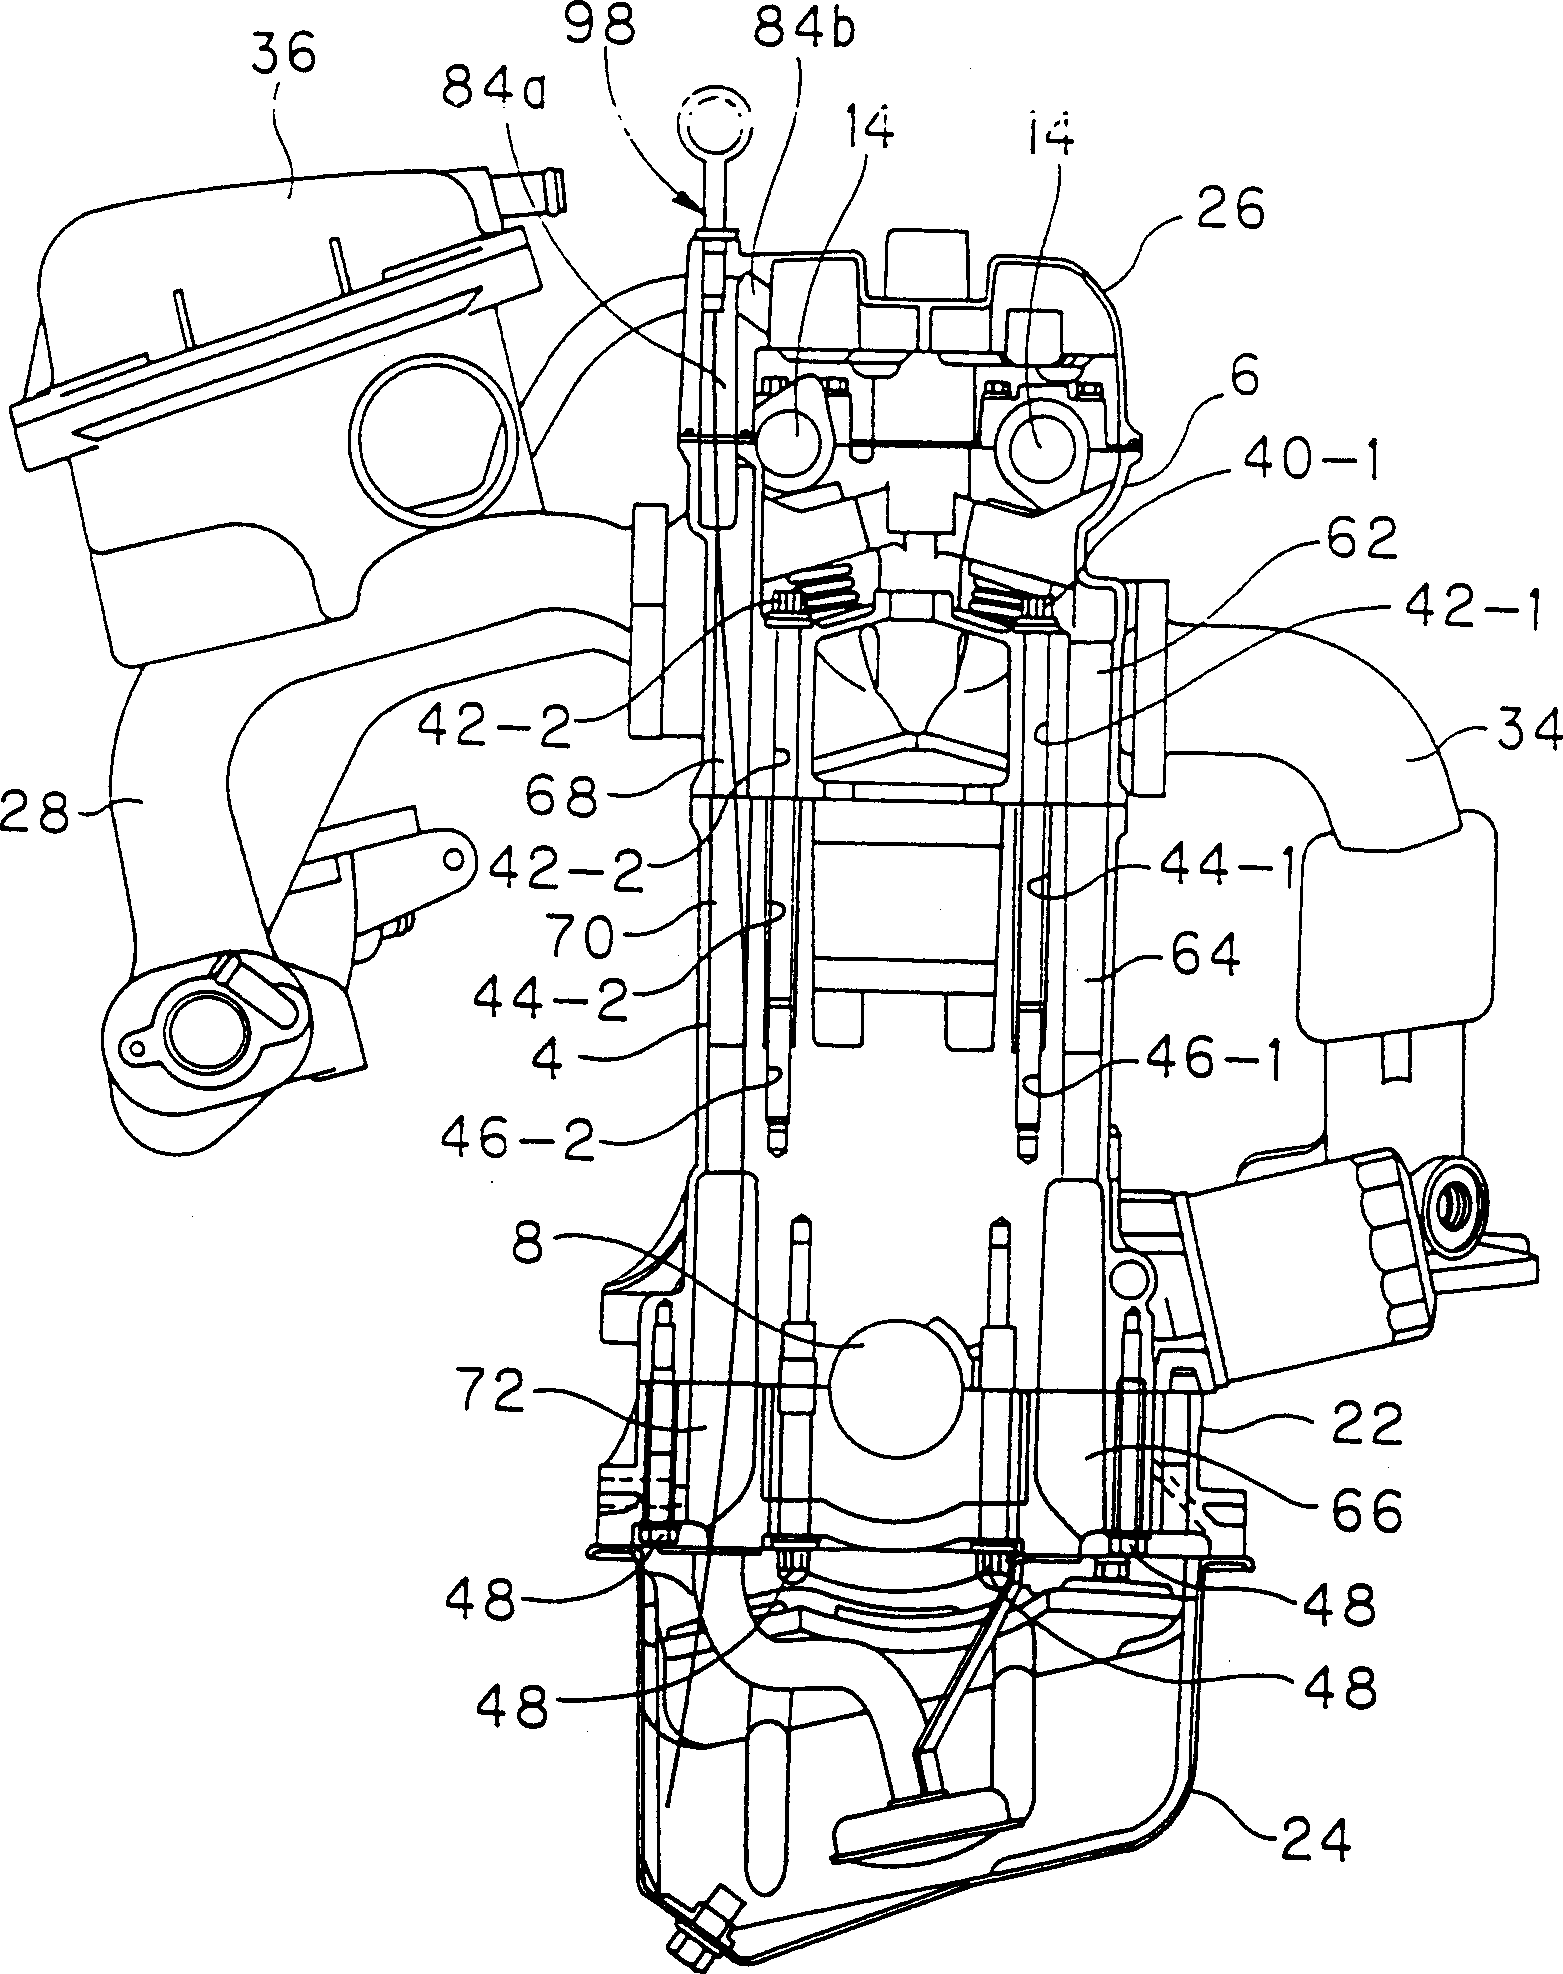 Leaked fuel gas return-flow structure for engine